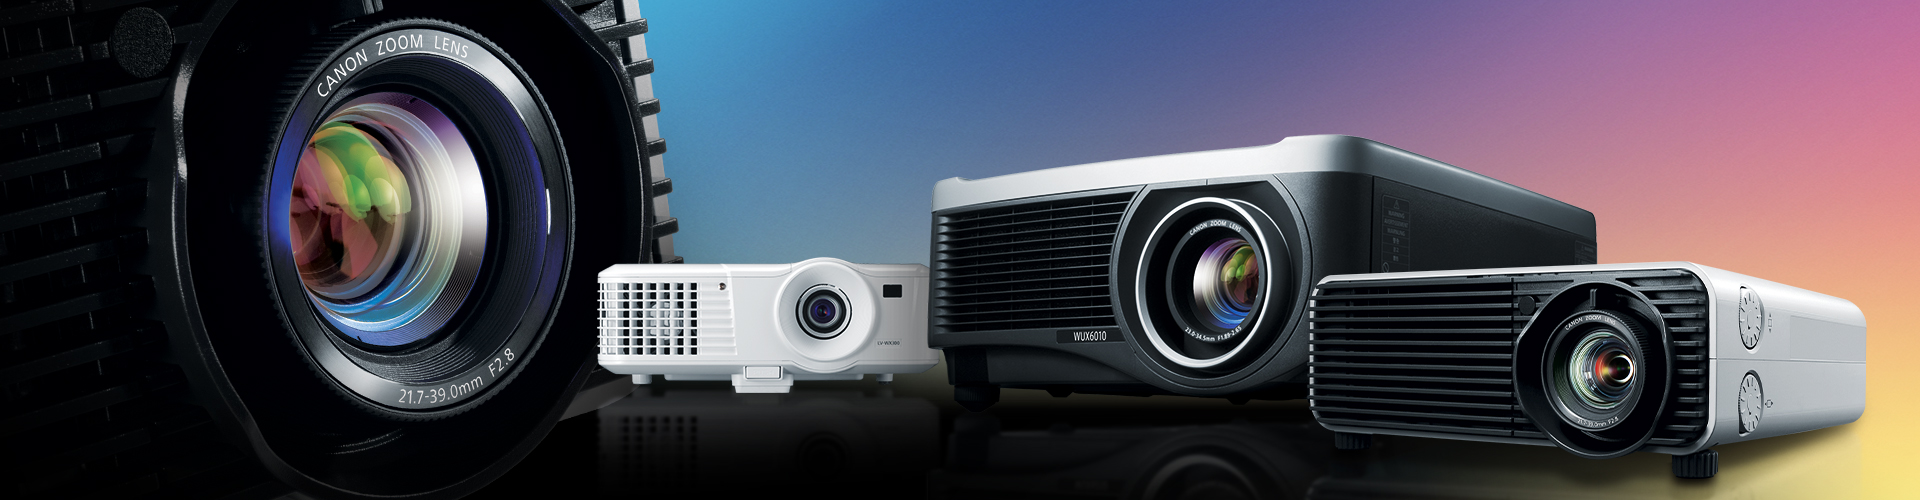 Projector hire and sales